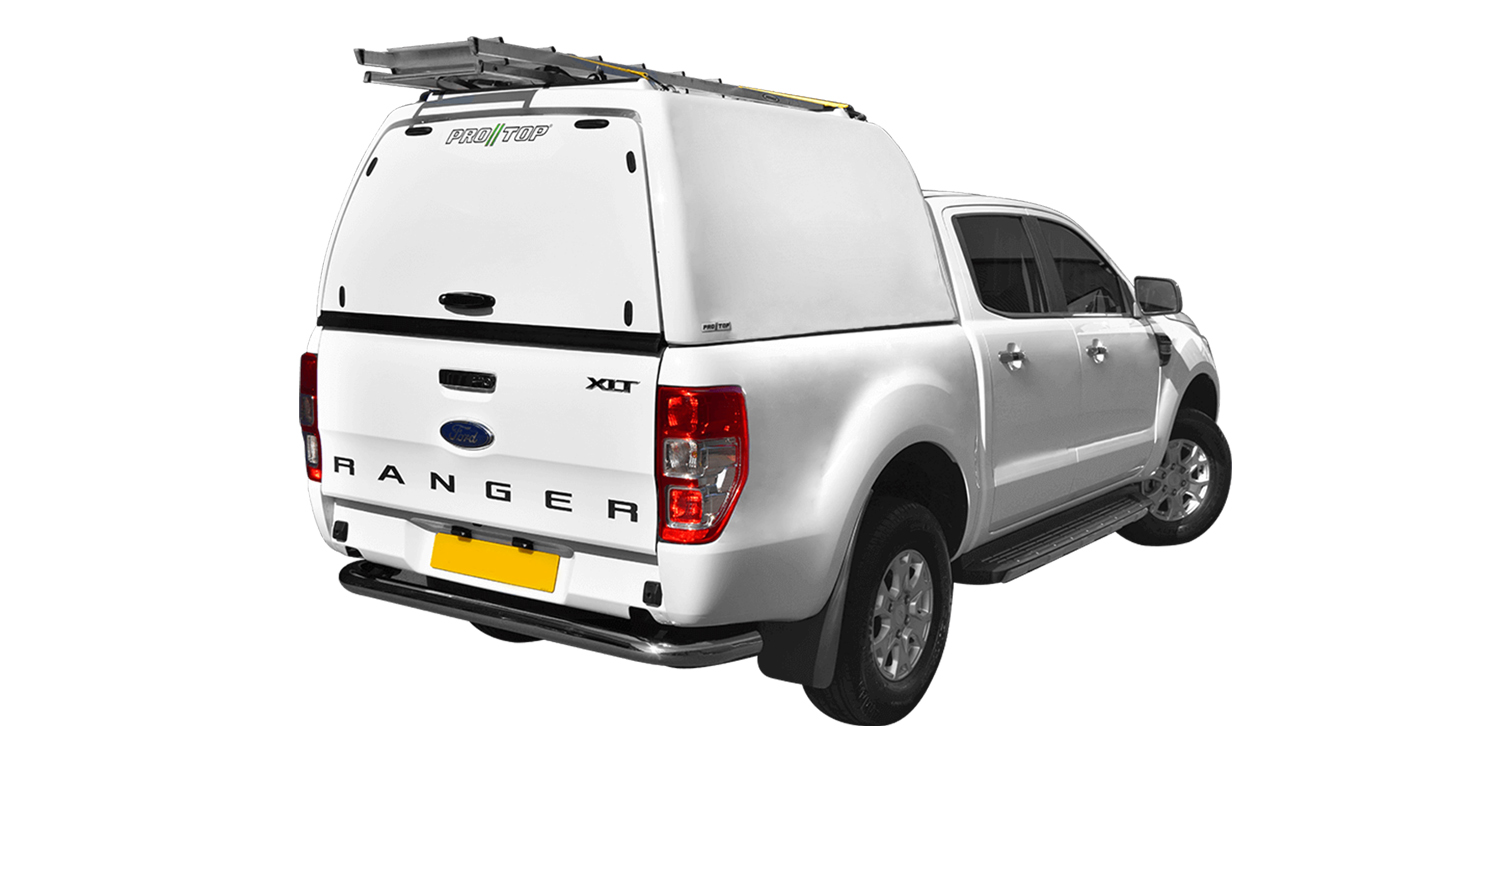 Pro//Top High roof tradesman on a Ford Ranger